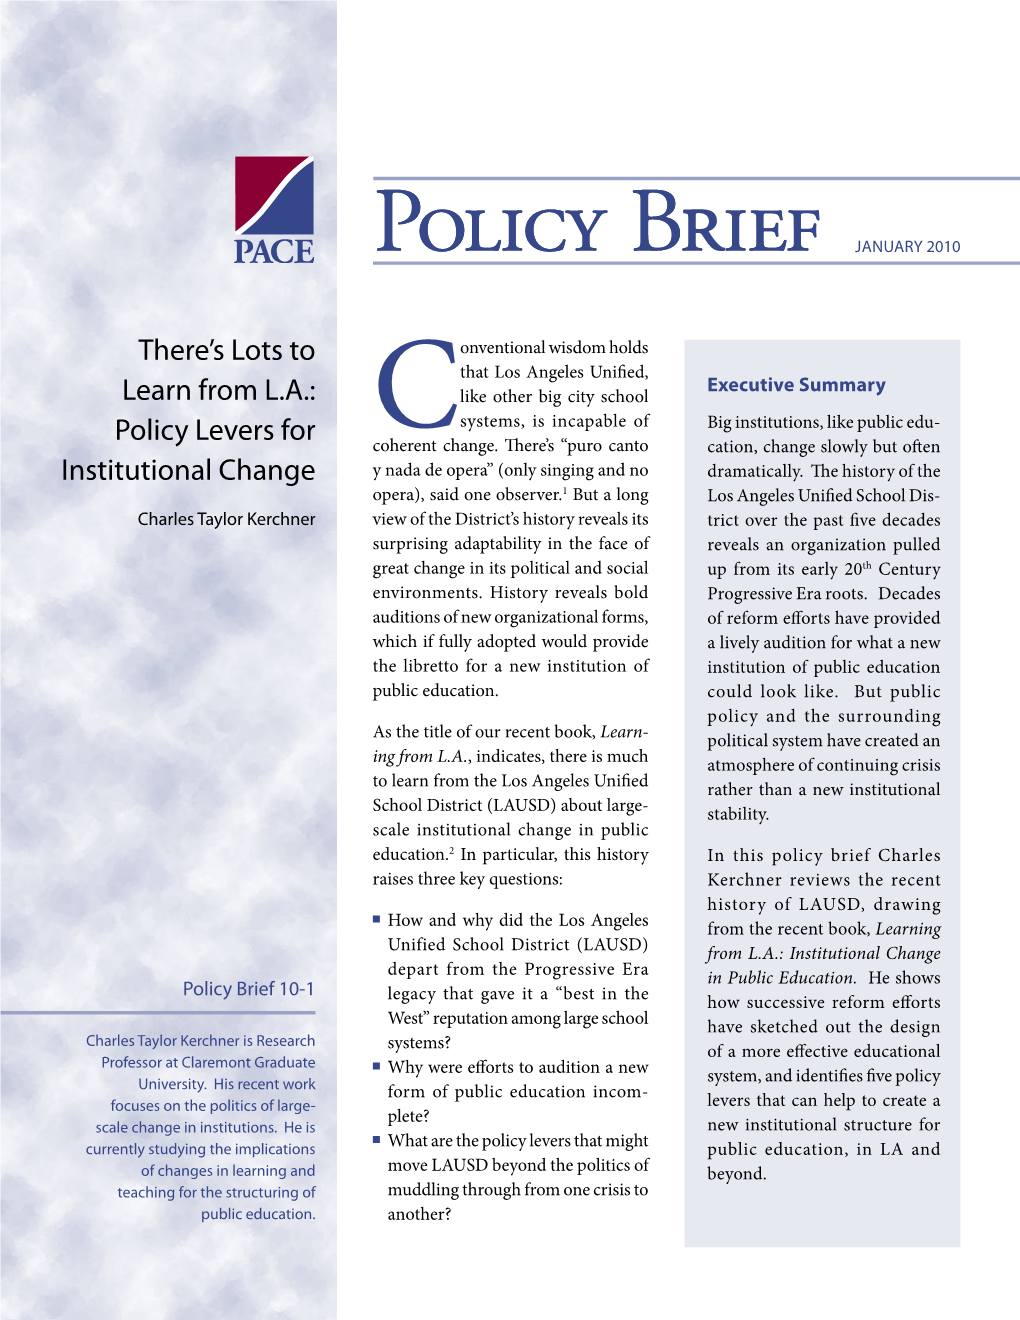 Policy Brief January 2010